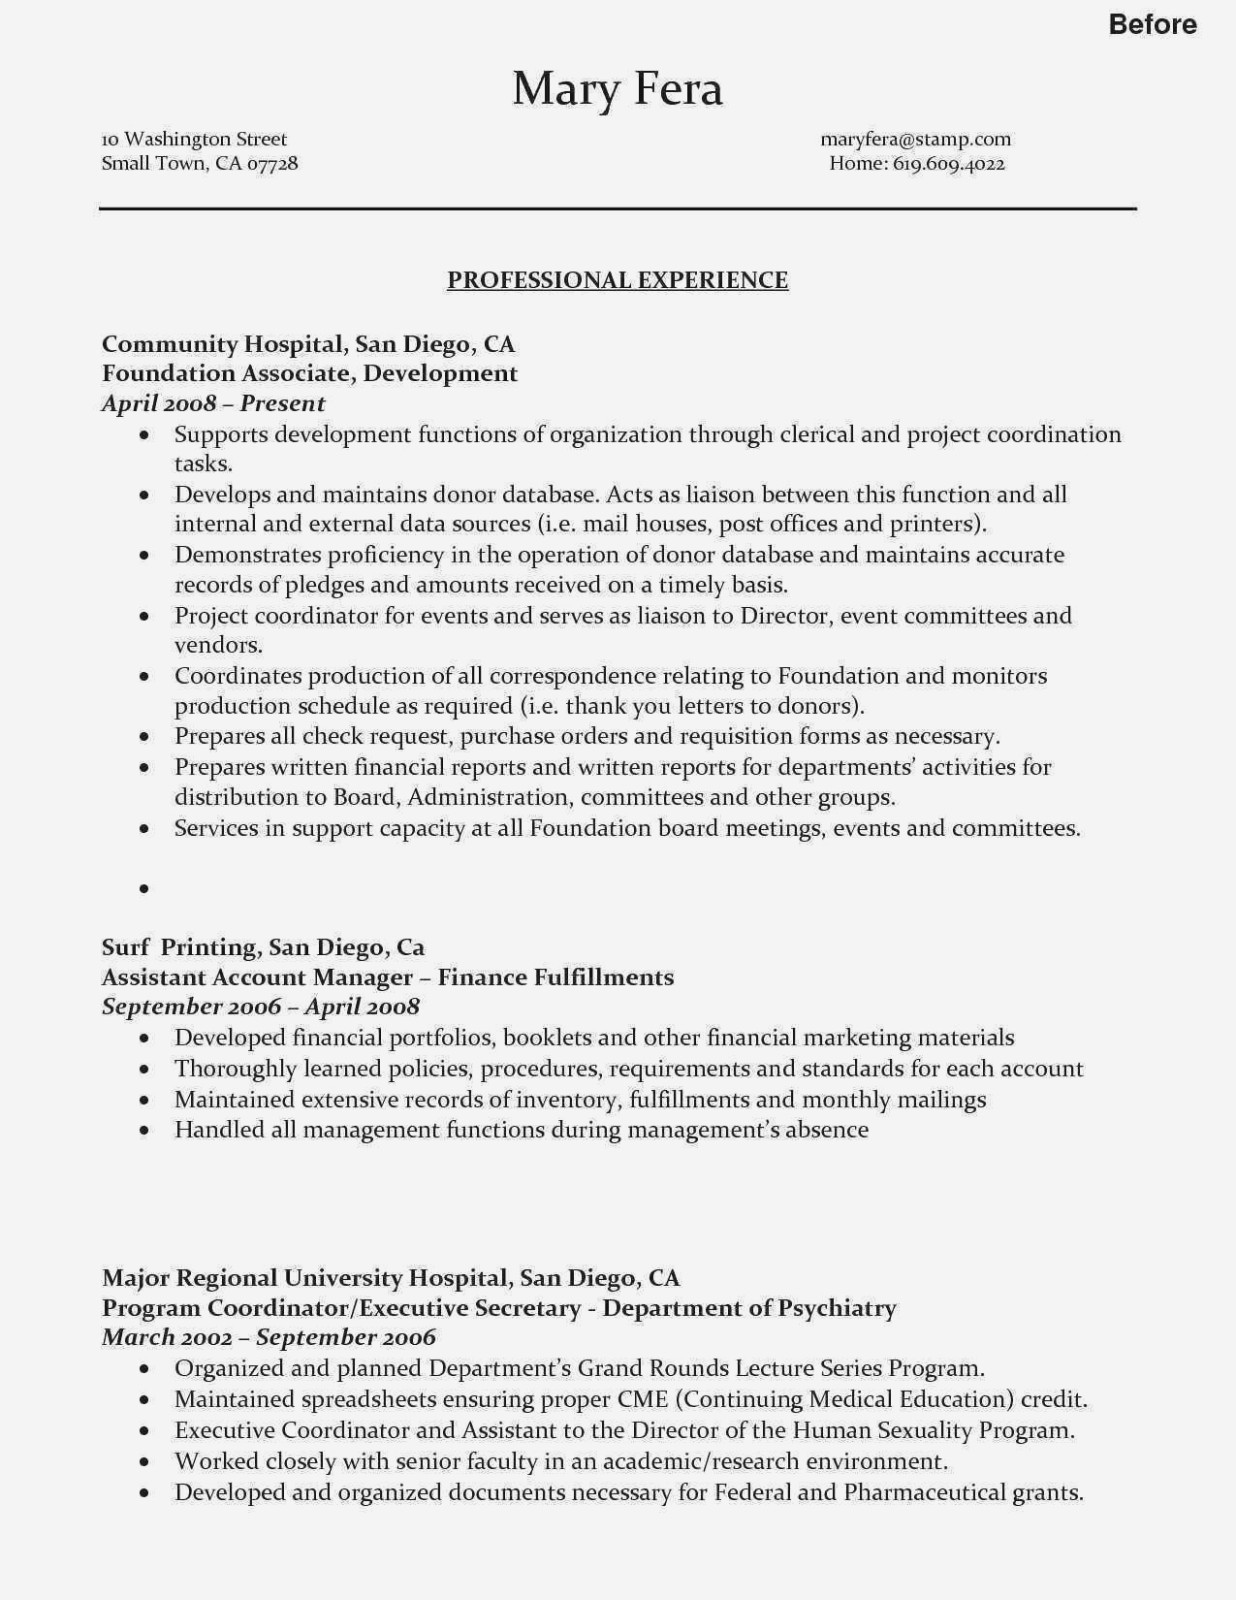 Entry Level Administrative assistant Resume Beautiful Ten Stereotypes About Entry Level Medical